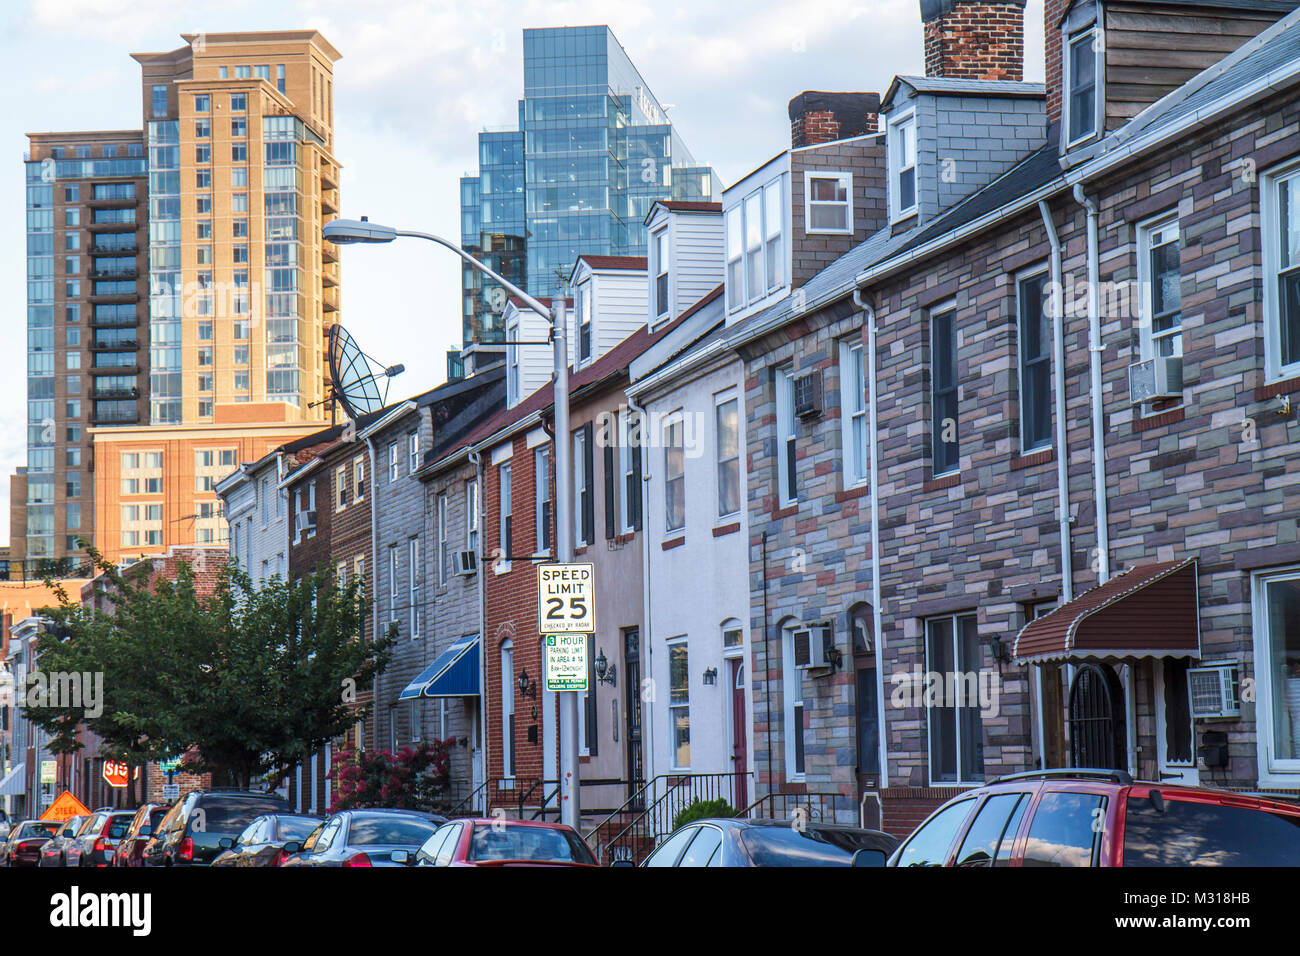 Baltimore Maryland,Little Italy neighborhood,row house,brick,Formstone,contrast,high rise skyscraper skyscrapers building buildings traffic,road,sign, Stock Photo